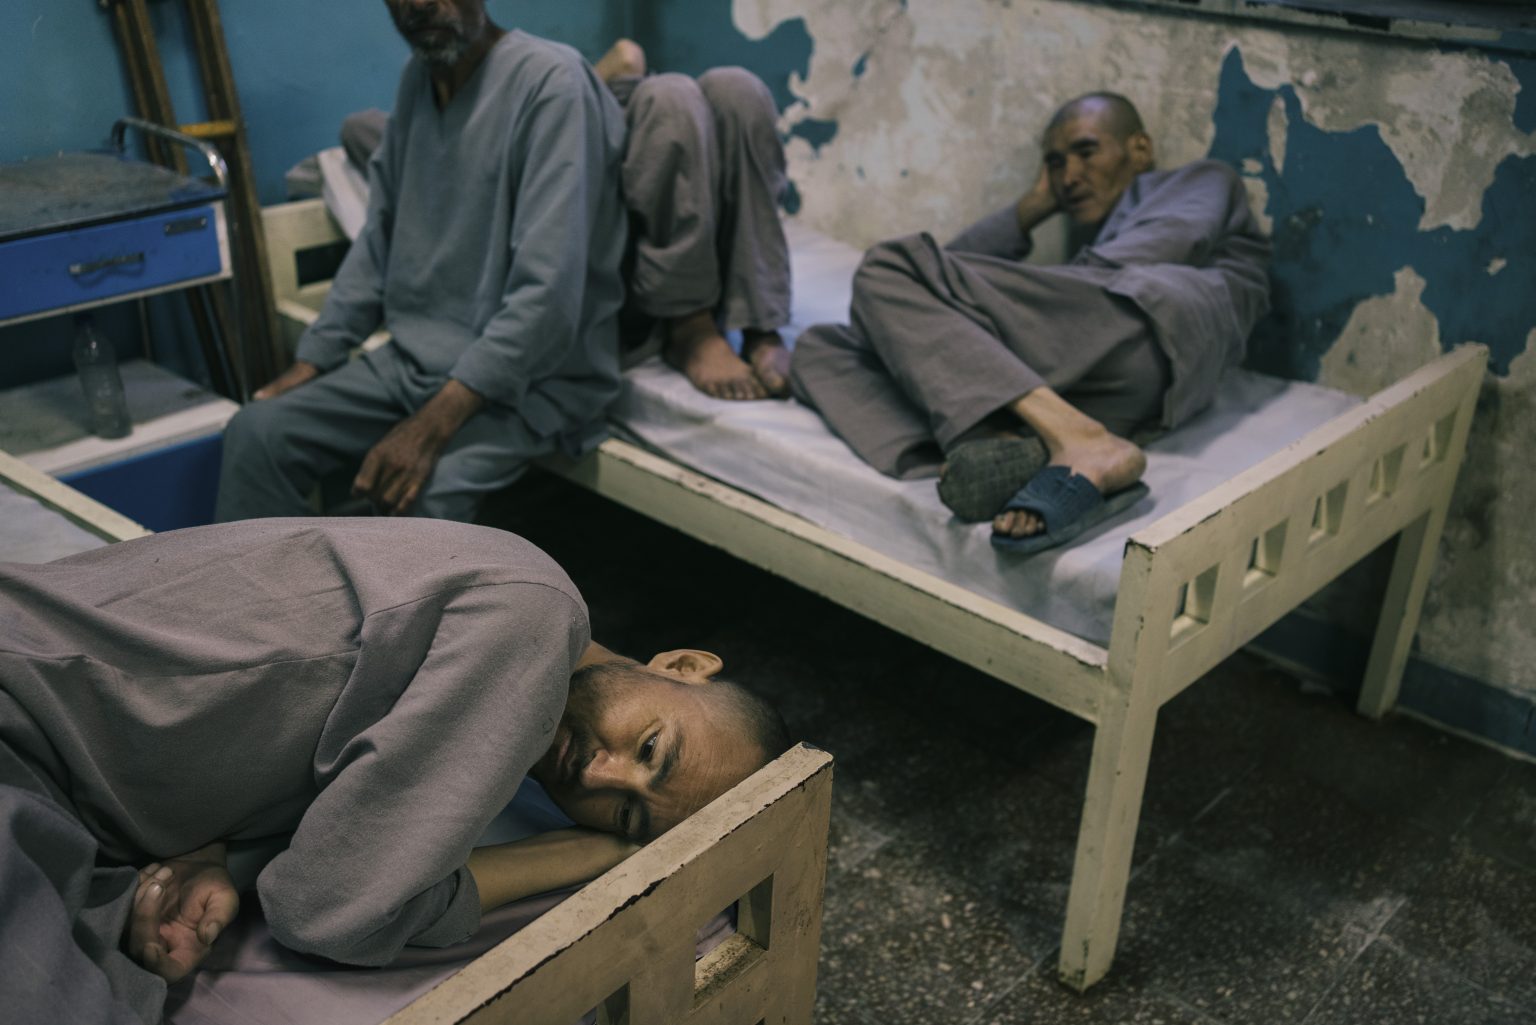 Kabul, Afghanistan, March 2022 - Patients of the rehabilitation center for drug addicts lay on their bed in their first period of detoxification. ><
Kabul, Afghanistan, marzo 2022 - Pazienti di un centro di recupero per tossicodipendenti sdraiati a letto durante il primo periodo di disintossicazione